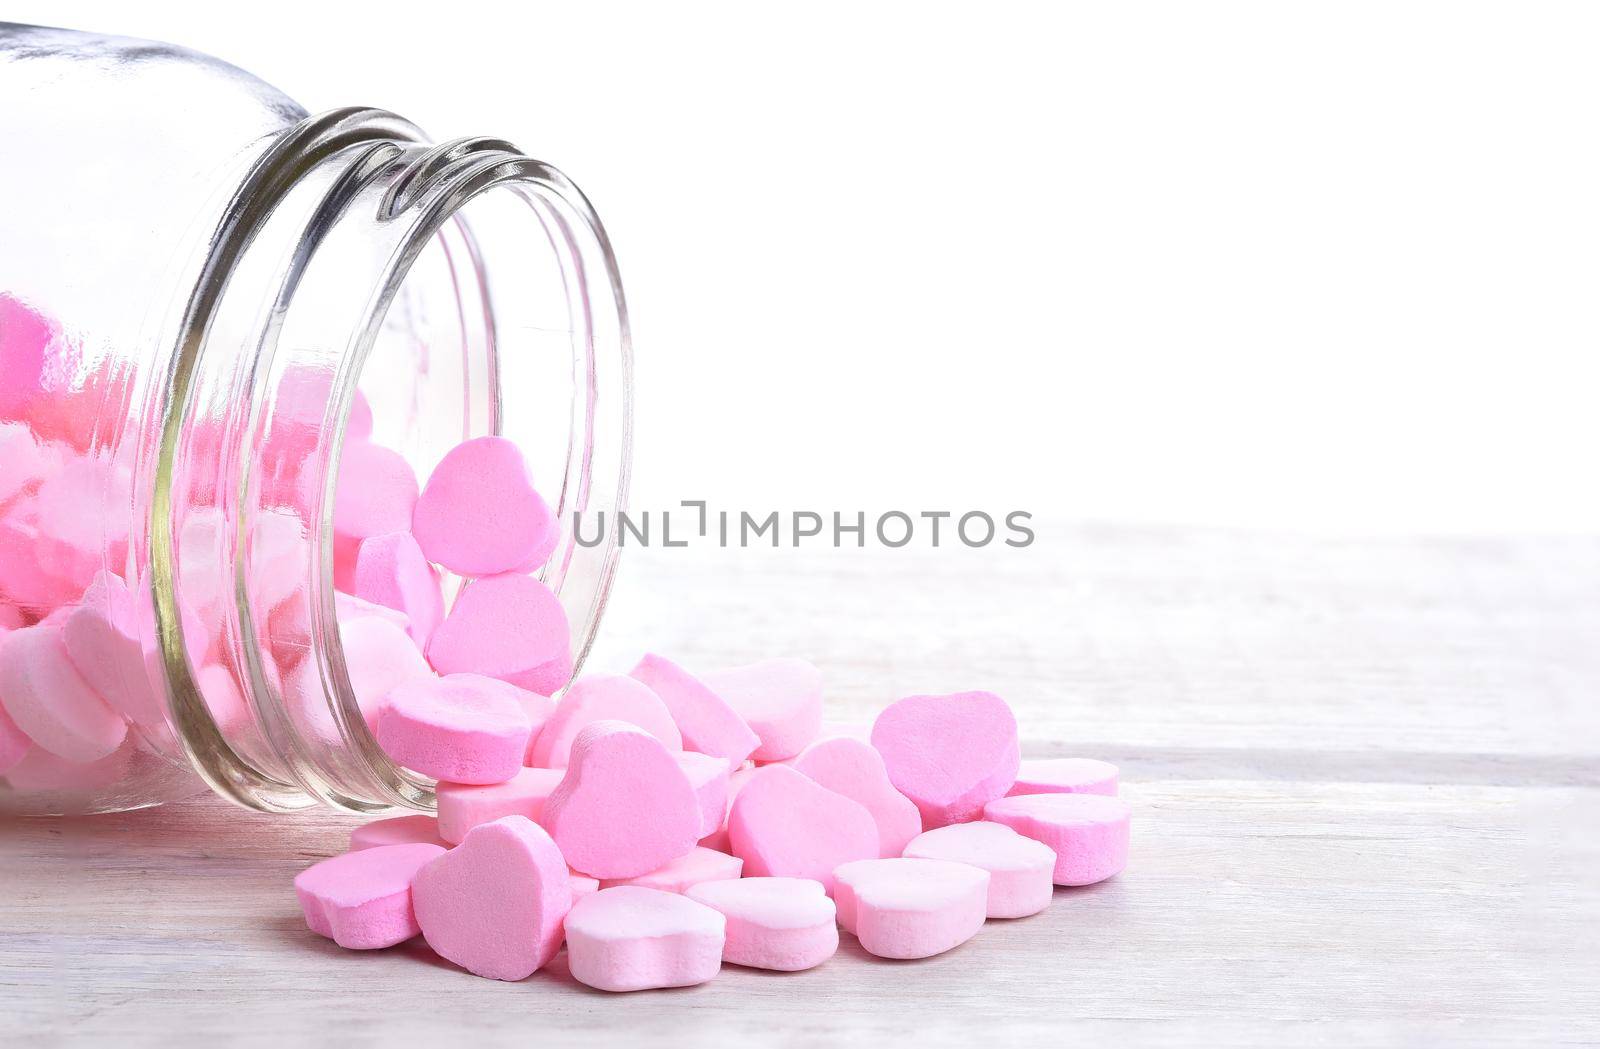 Candy Hearts Spill by sCukrov